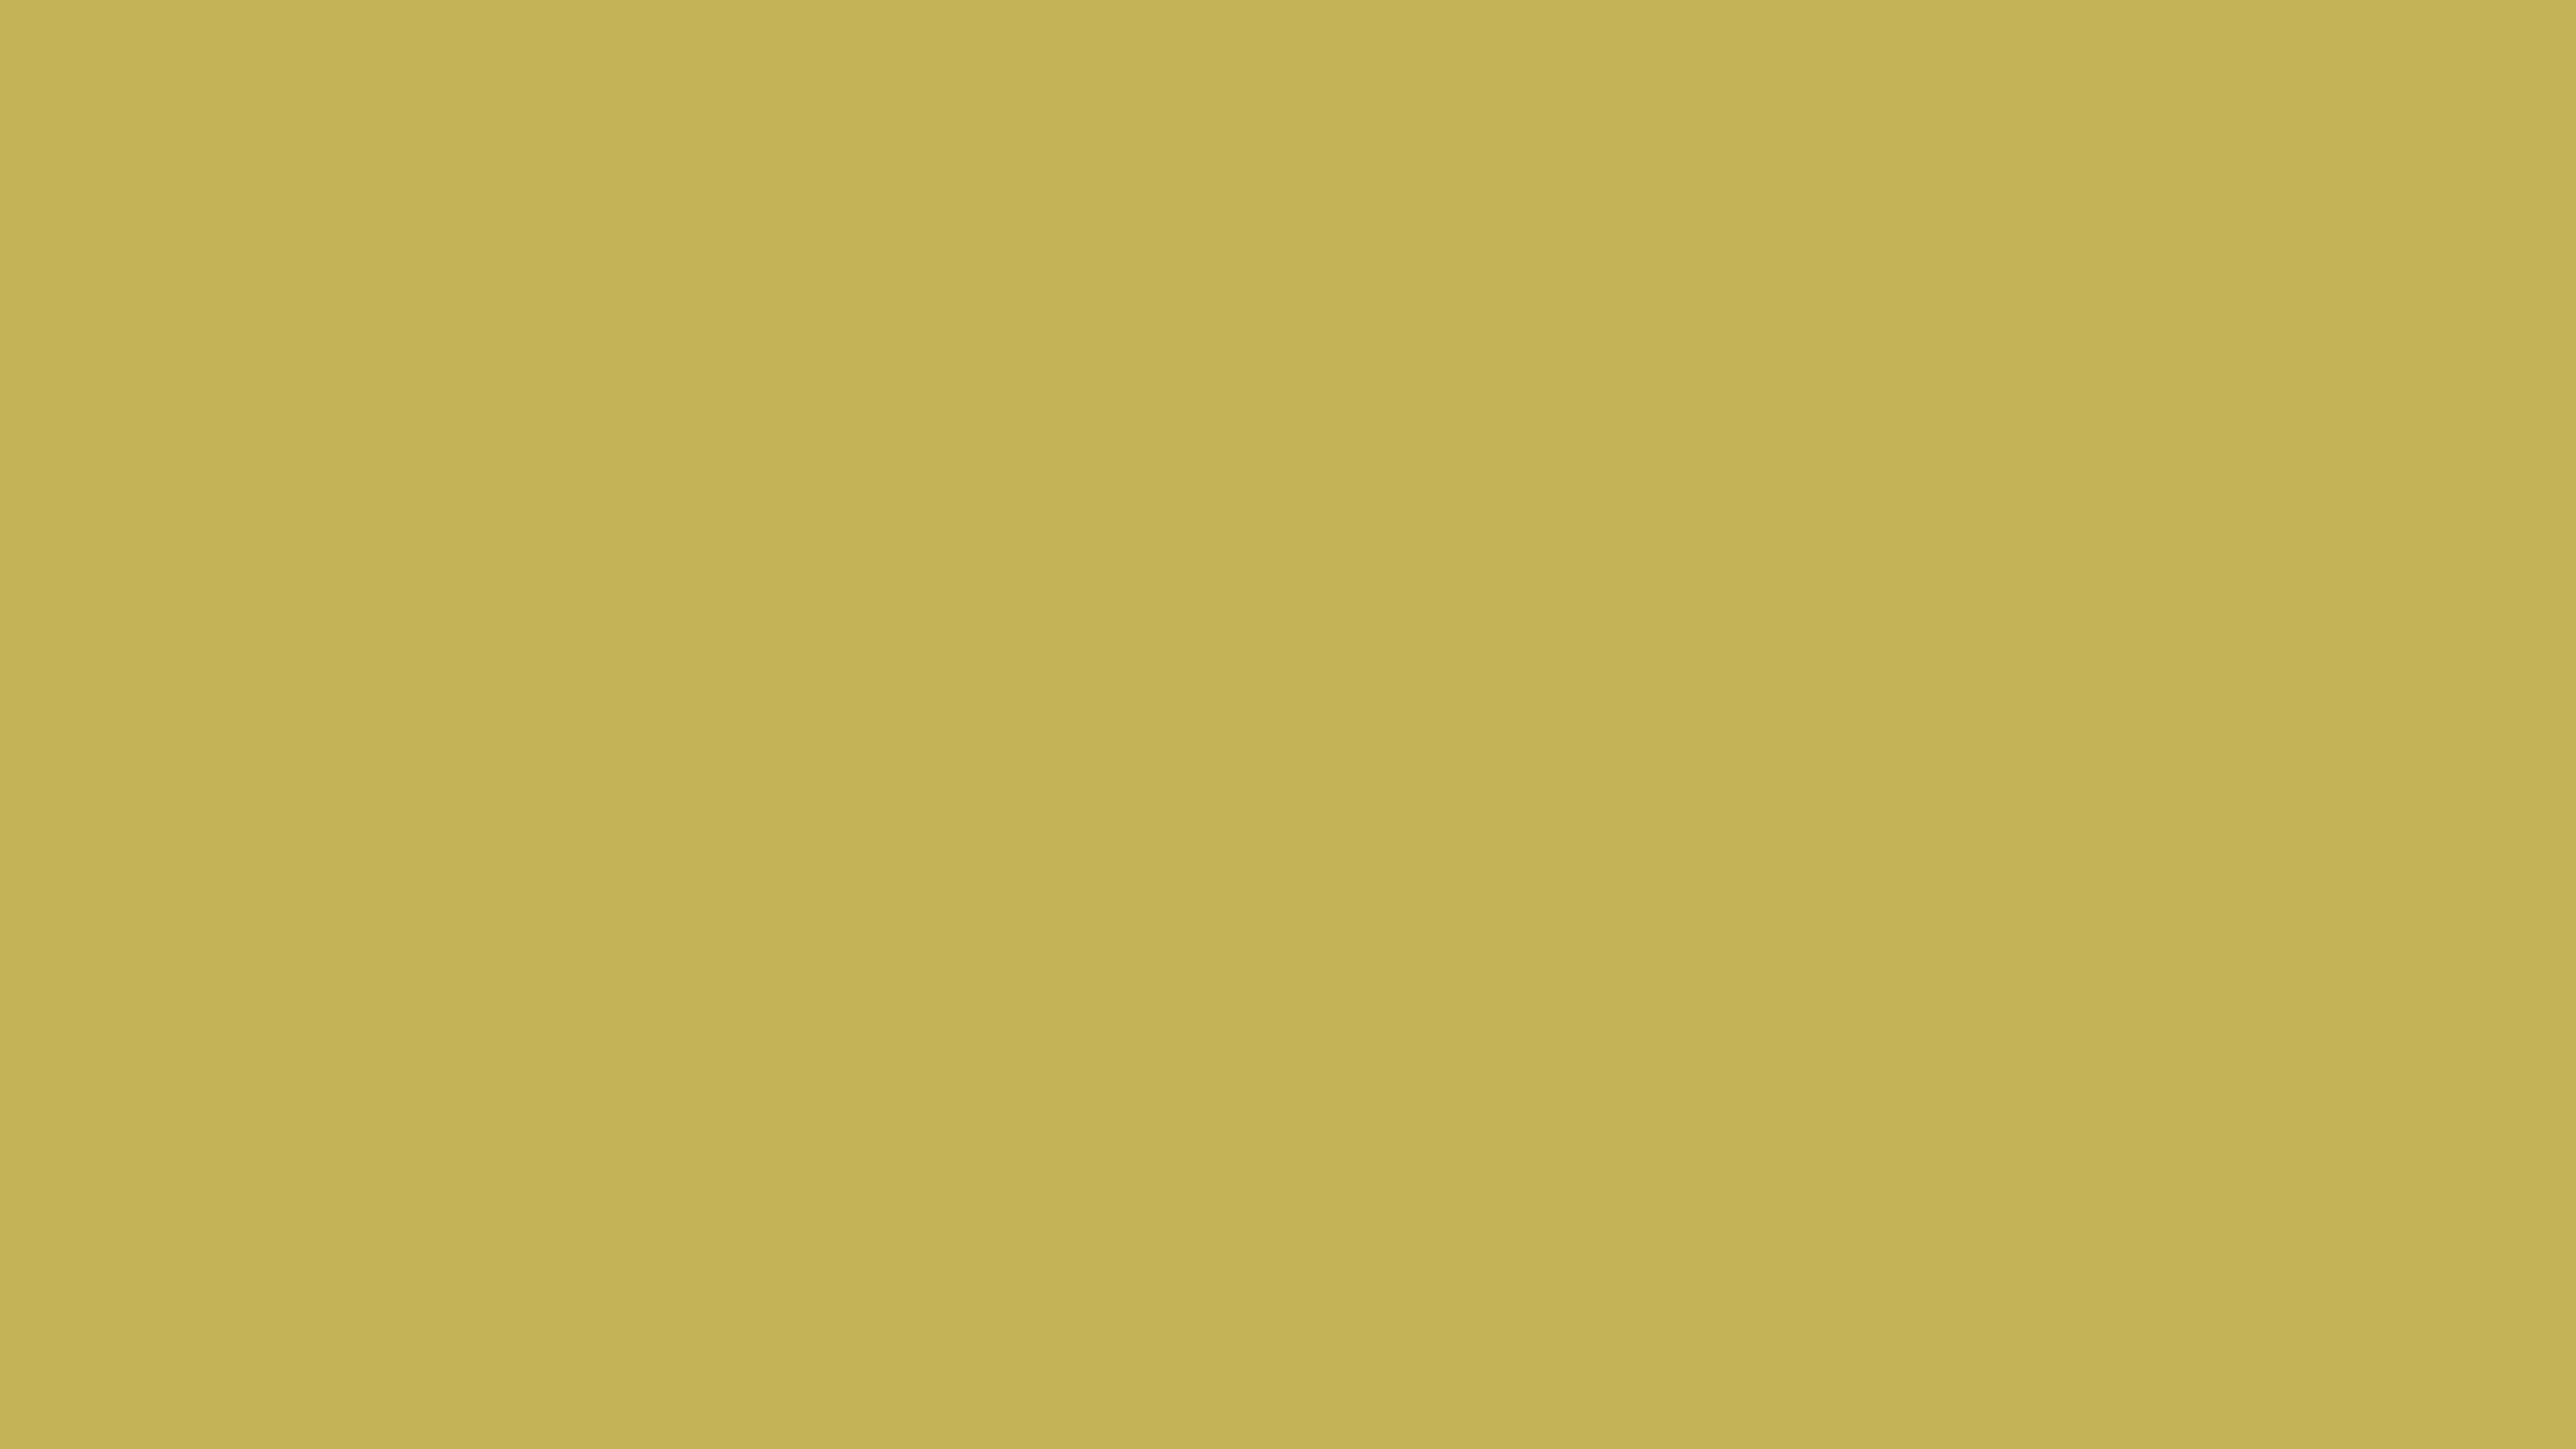 4096x2304 Vegas Gold Solid Color Background